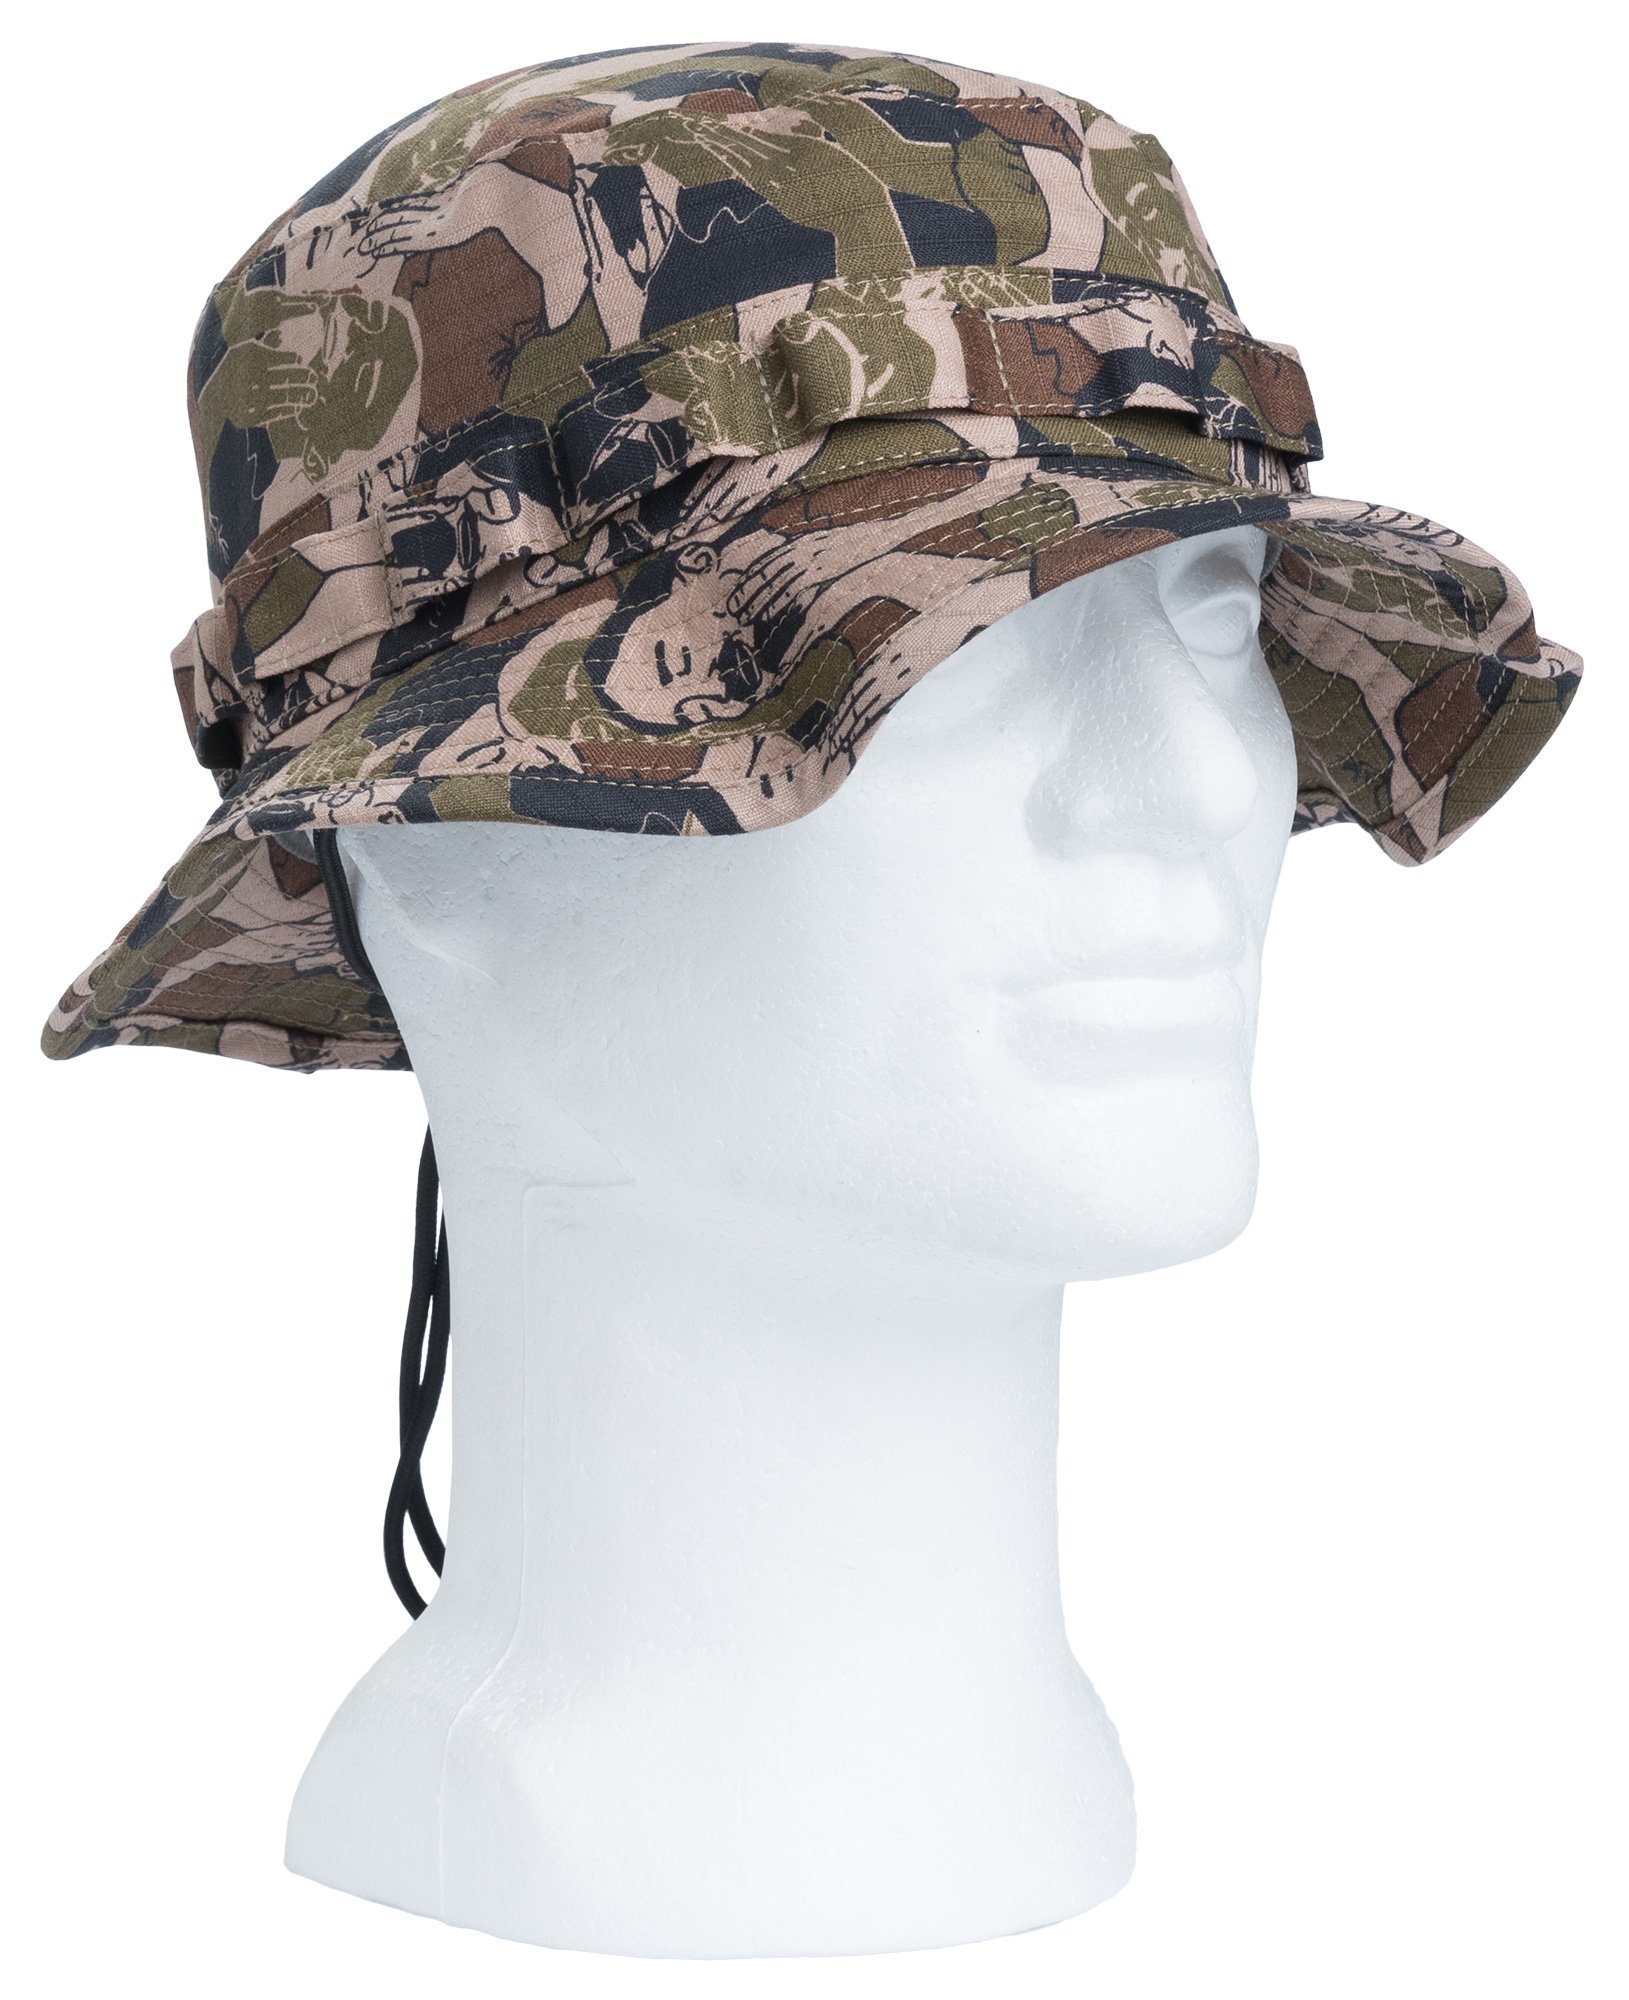 The history of Boonie Hats